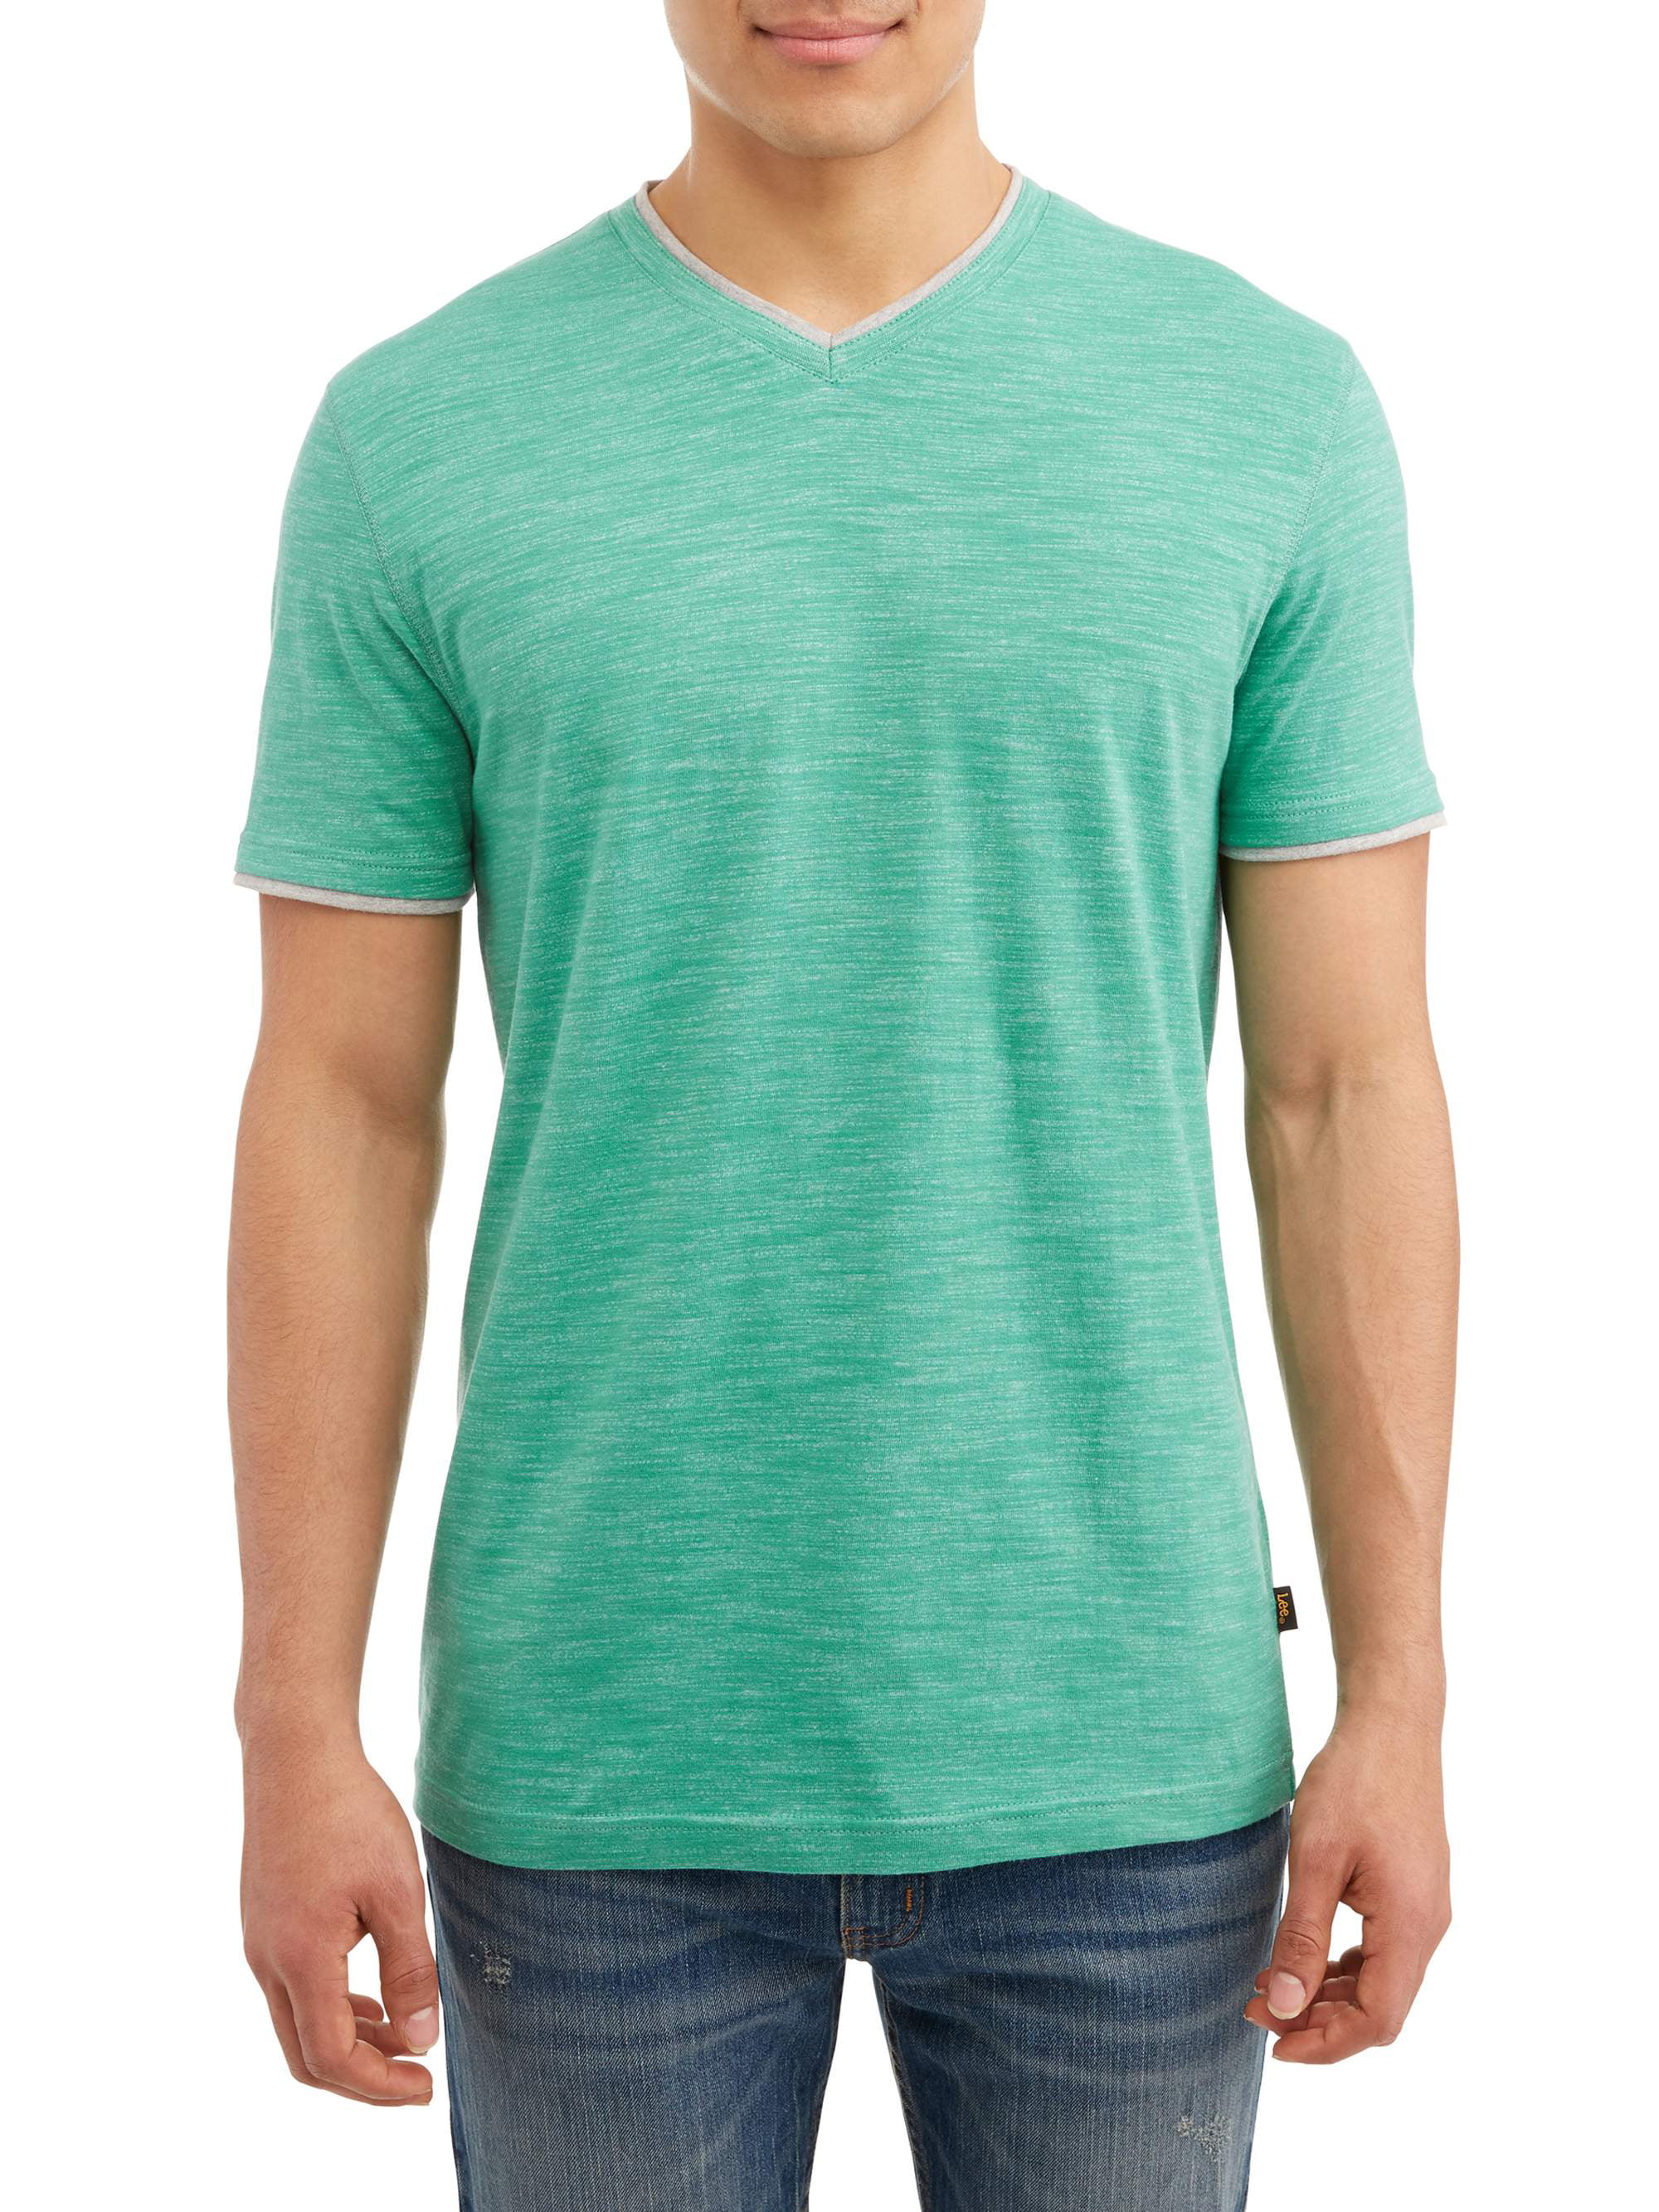 Lee Men's Short Sleeve Textured Jersey V-Neck Tee, Available up to size ...